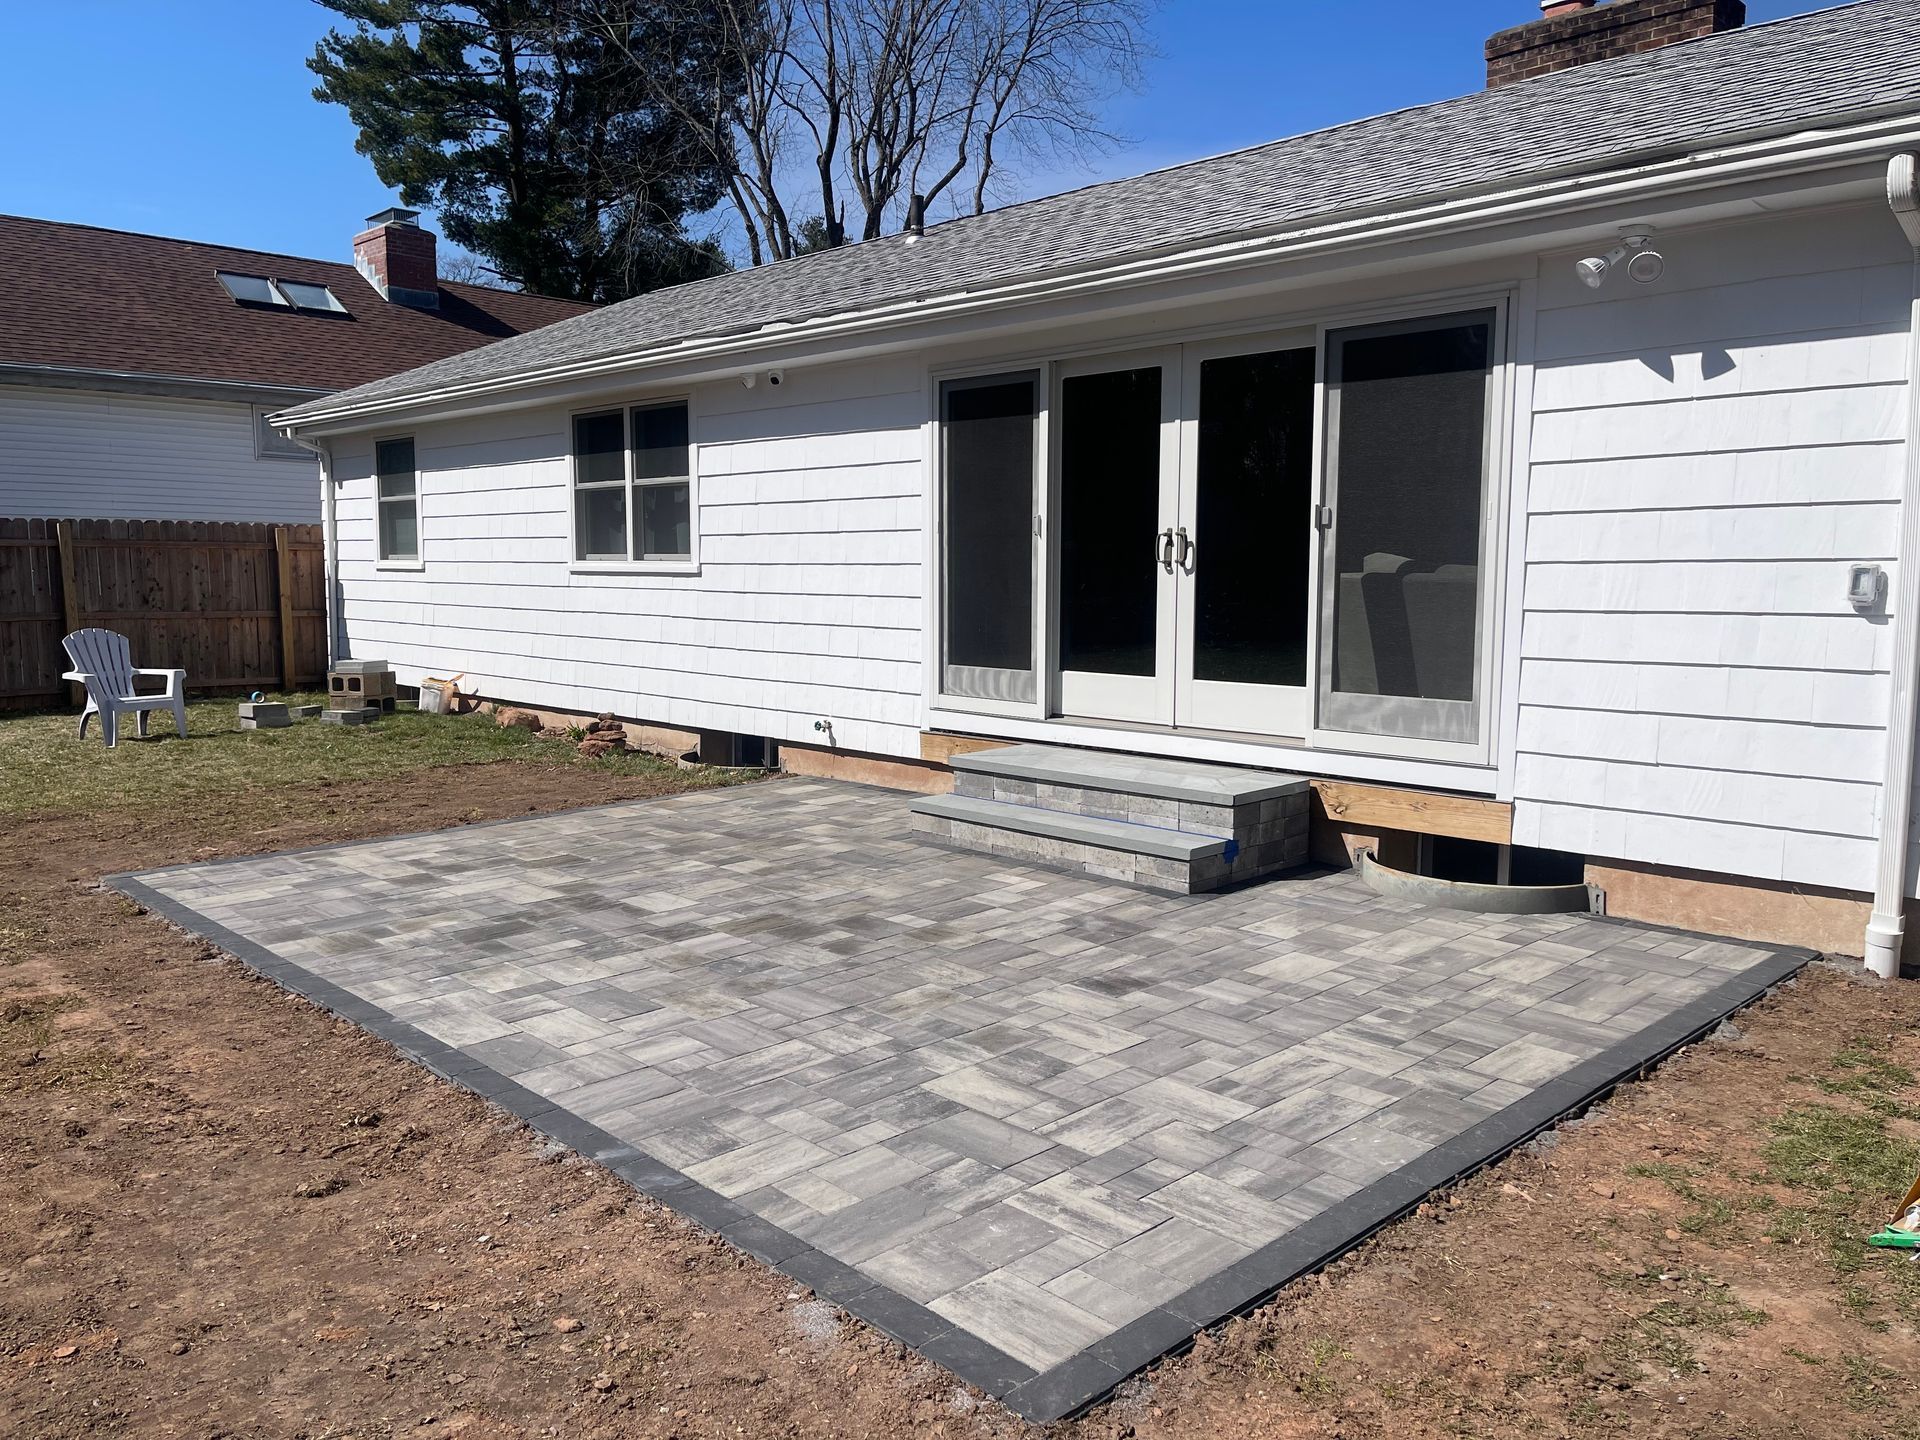 Nicolock Paver Patio with Bluestone Steps in West Hartford, Connecticut Landscape Solutions